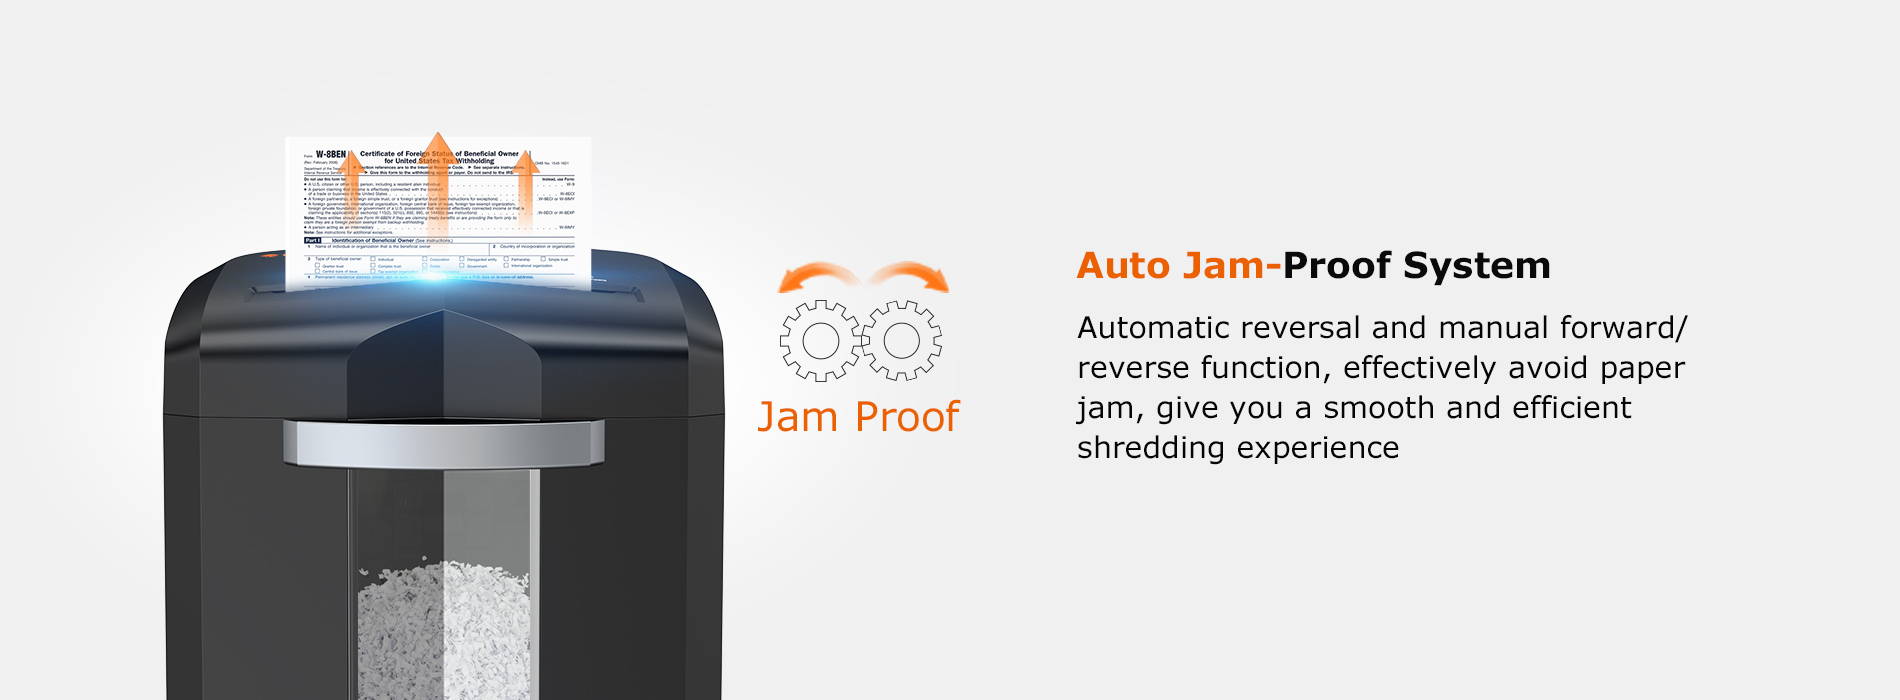 Auto Jam-Proof System  Automatic reversal and manual forward/ reverse function, effectively avoid paper jam, give you a smooth and efficient shredding experience